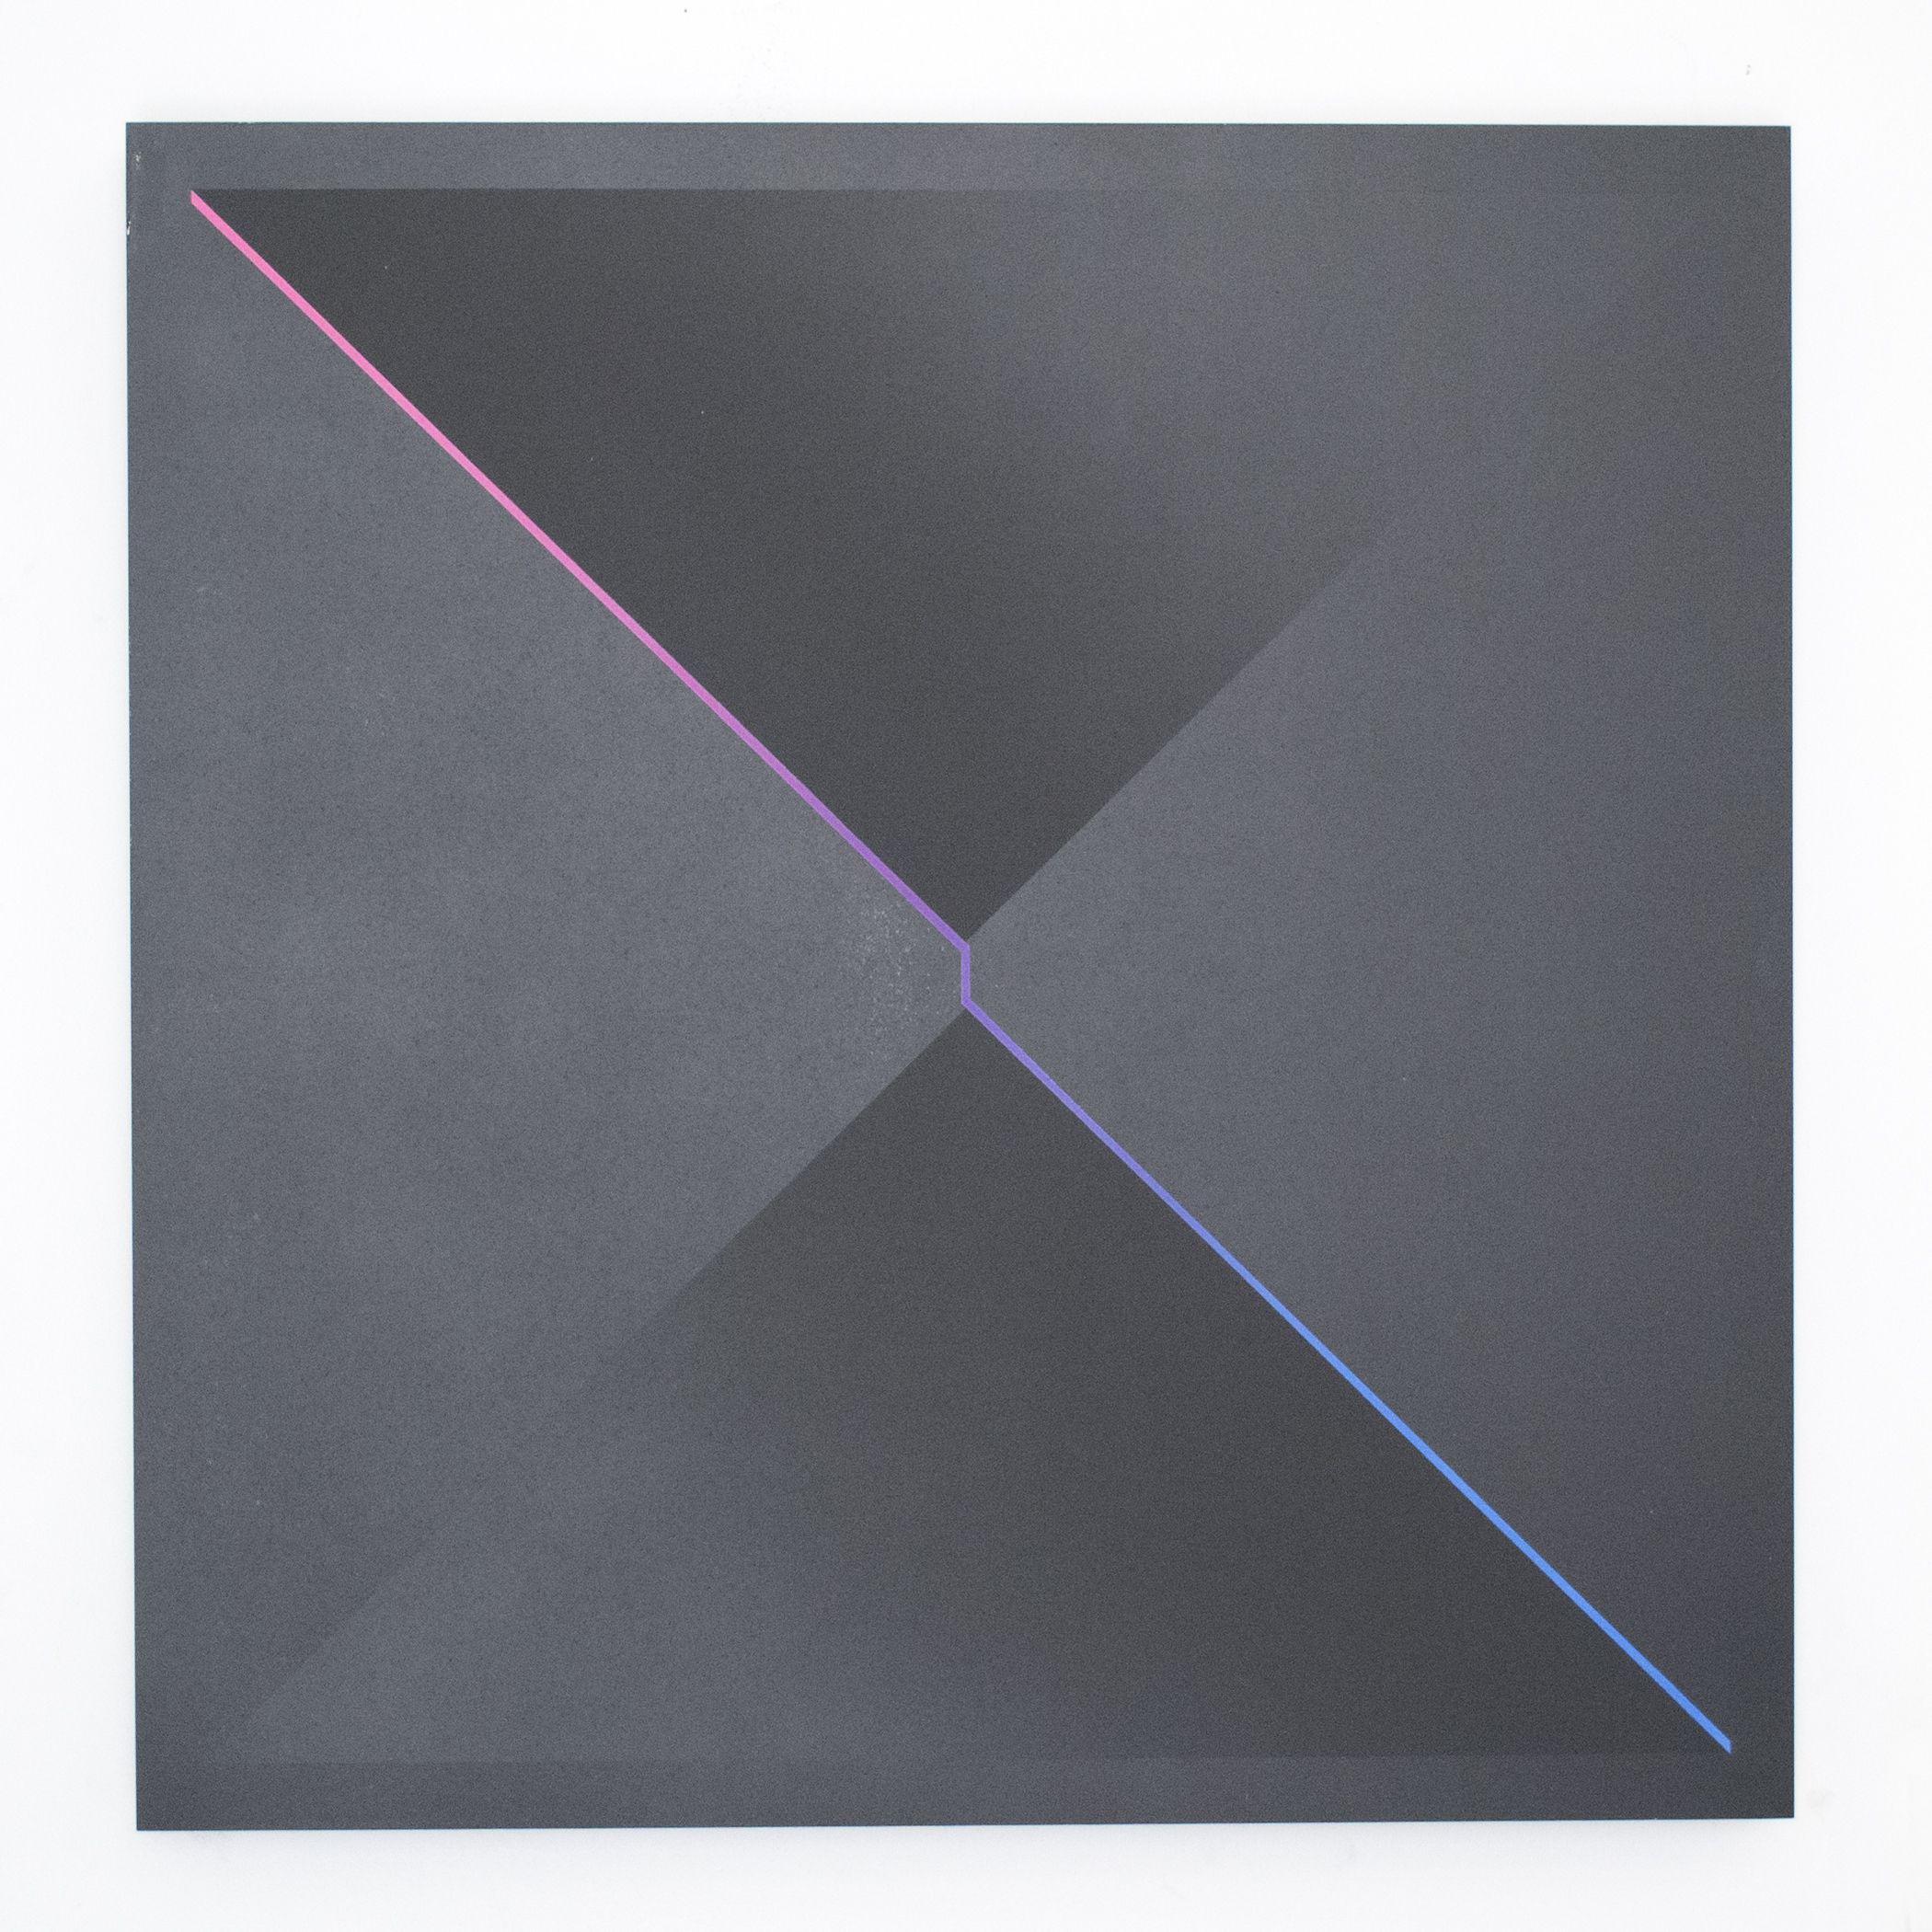 (untitled - two triangles, matte/gloss)